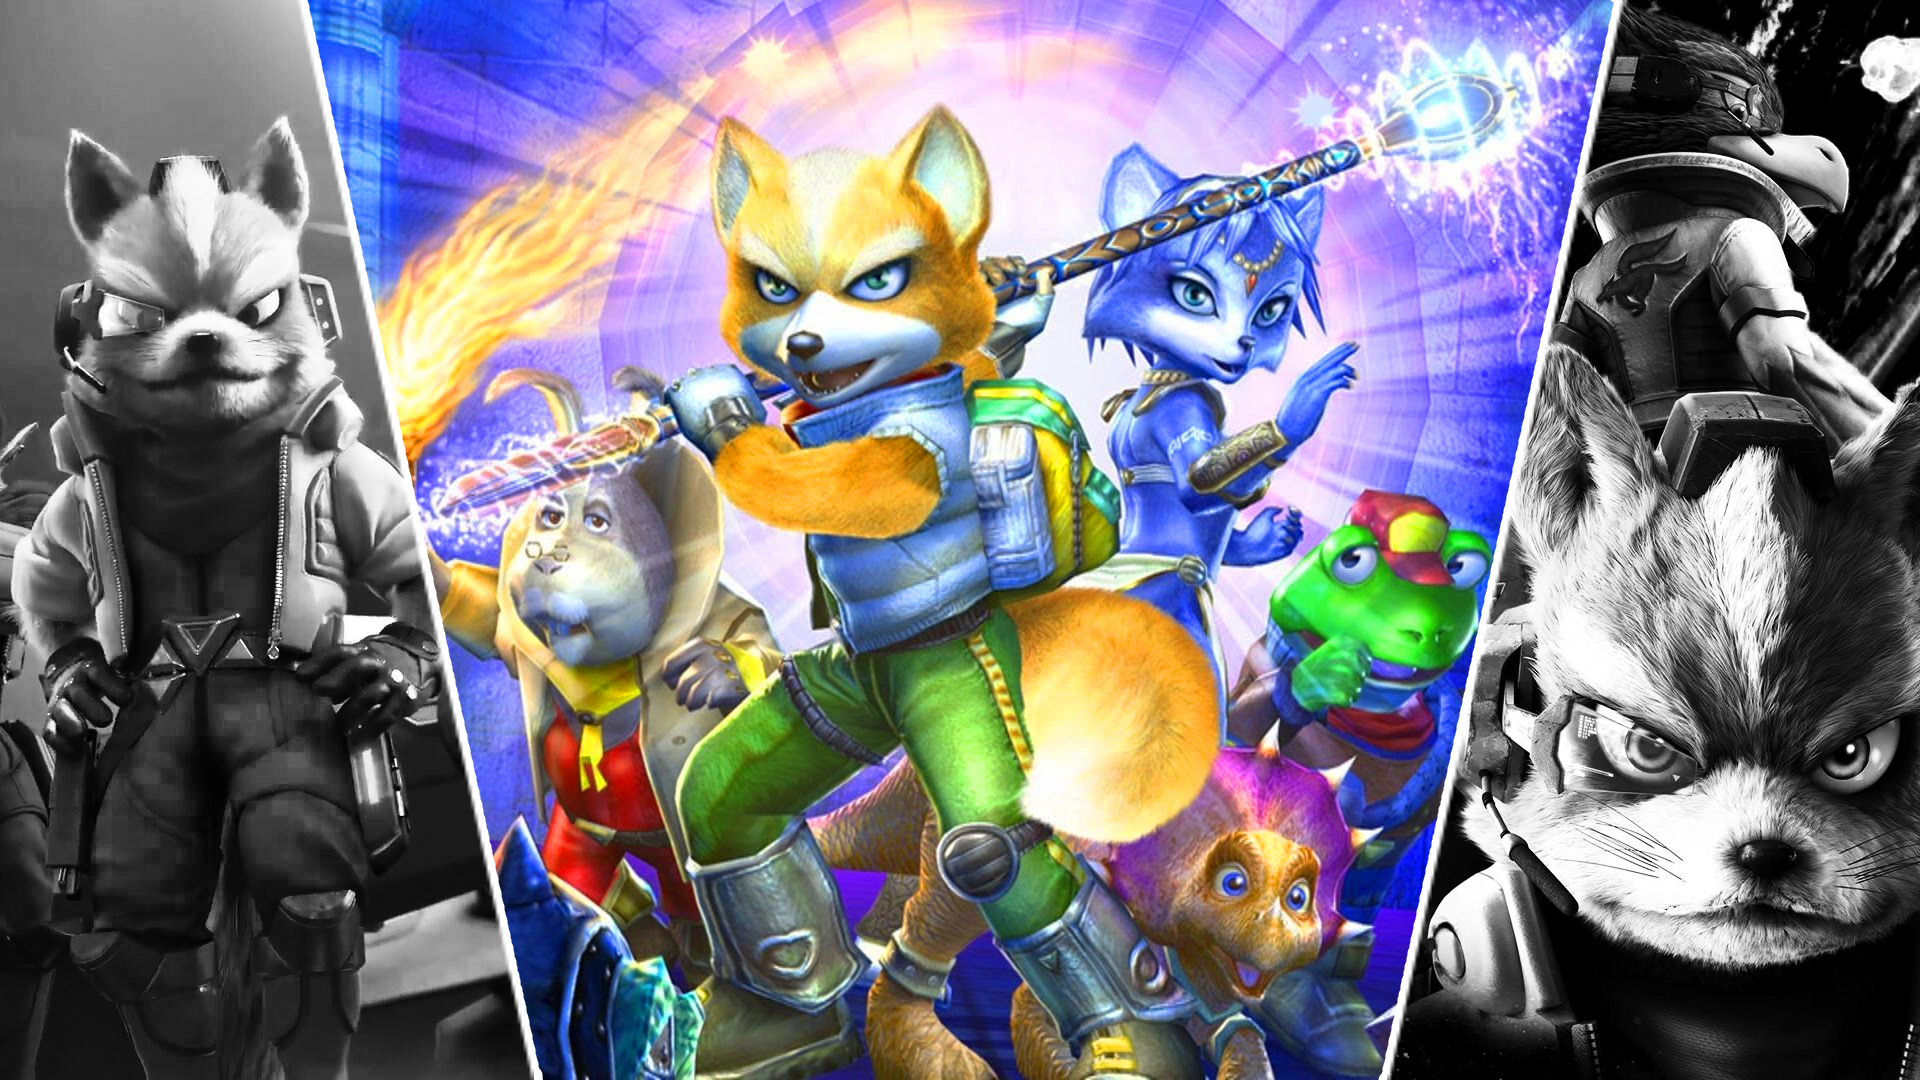 1920x1080 Star Fox Adventures is 20 years old today &acirc;&#128;&#147; and it's still the last truly good Star Fox game | VG247